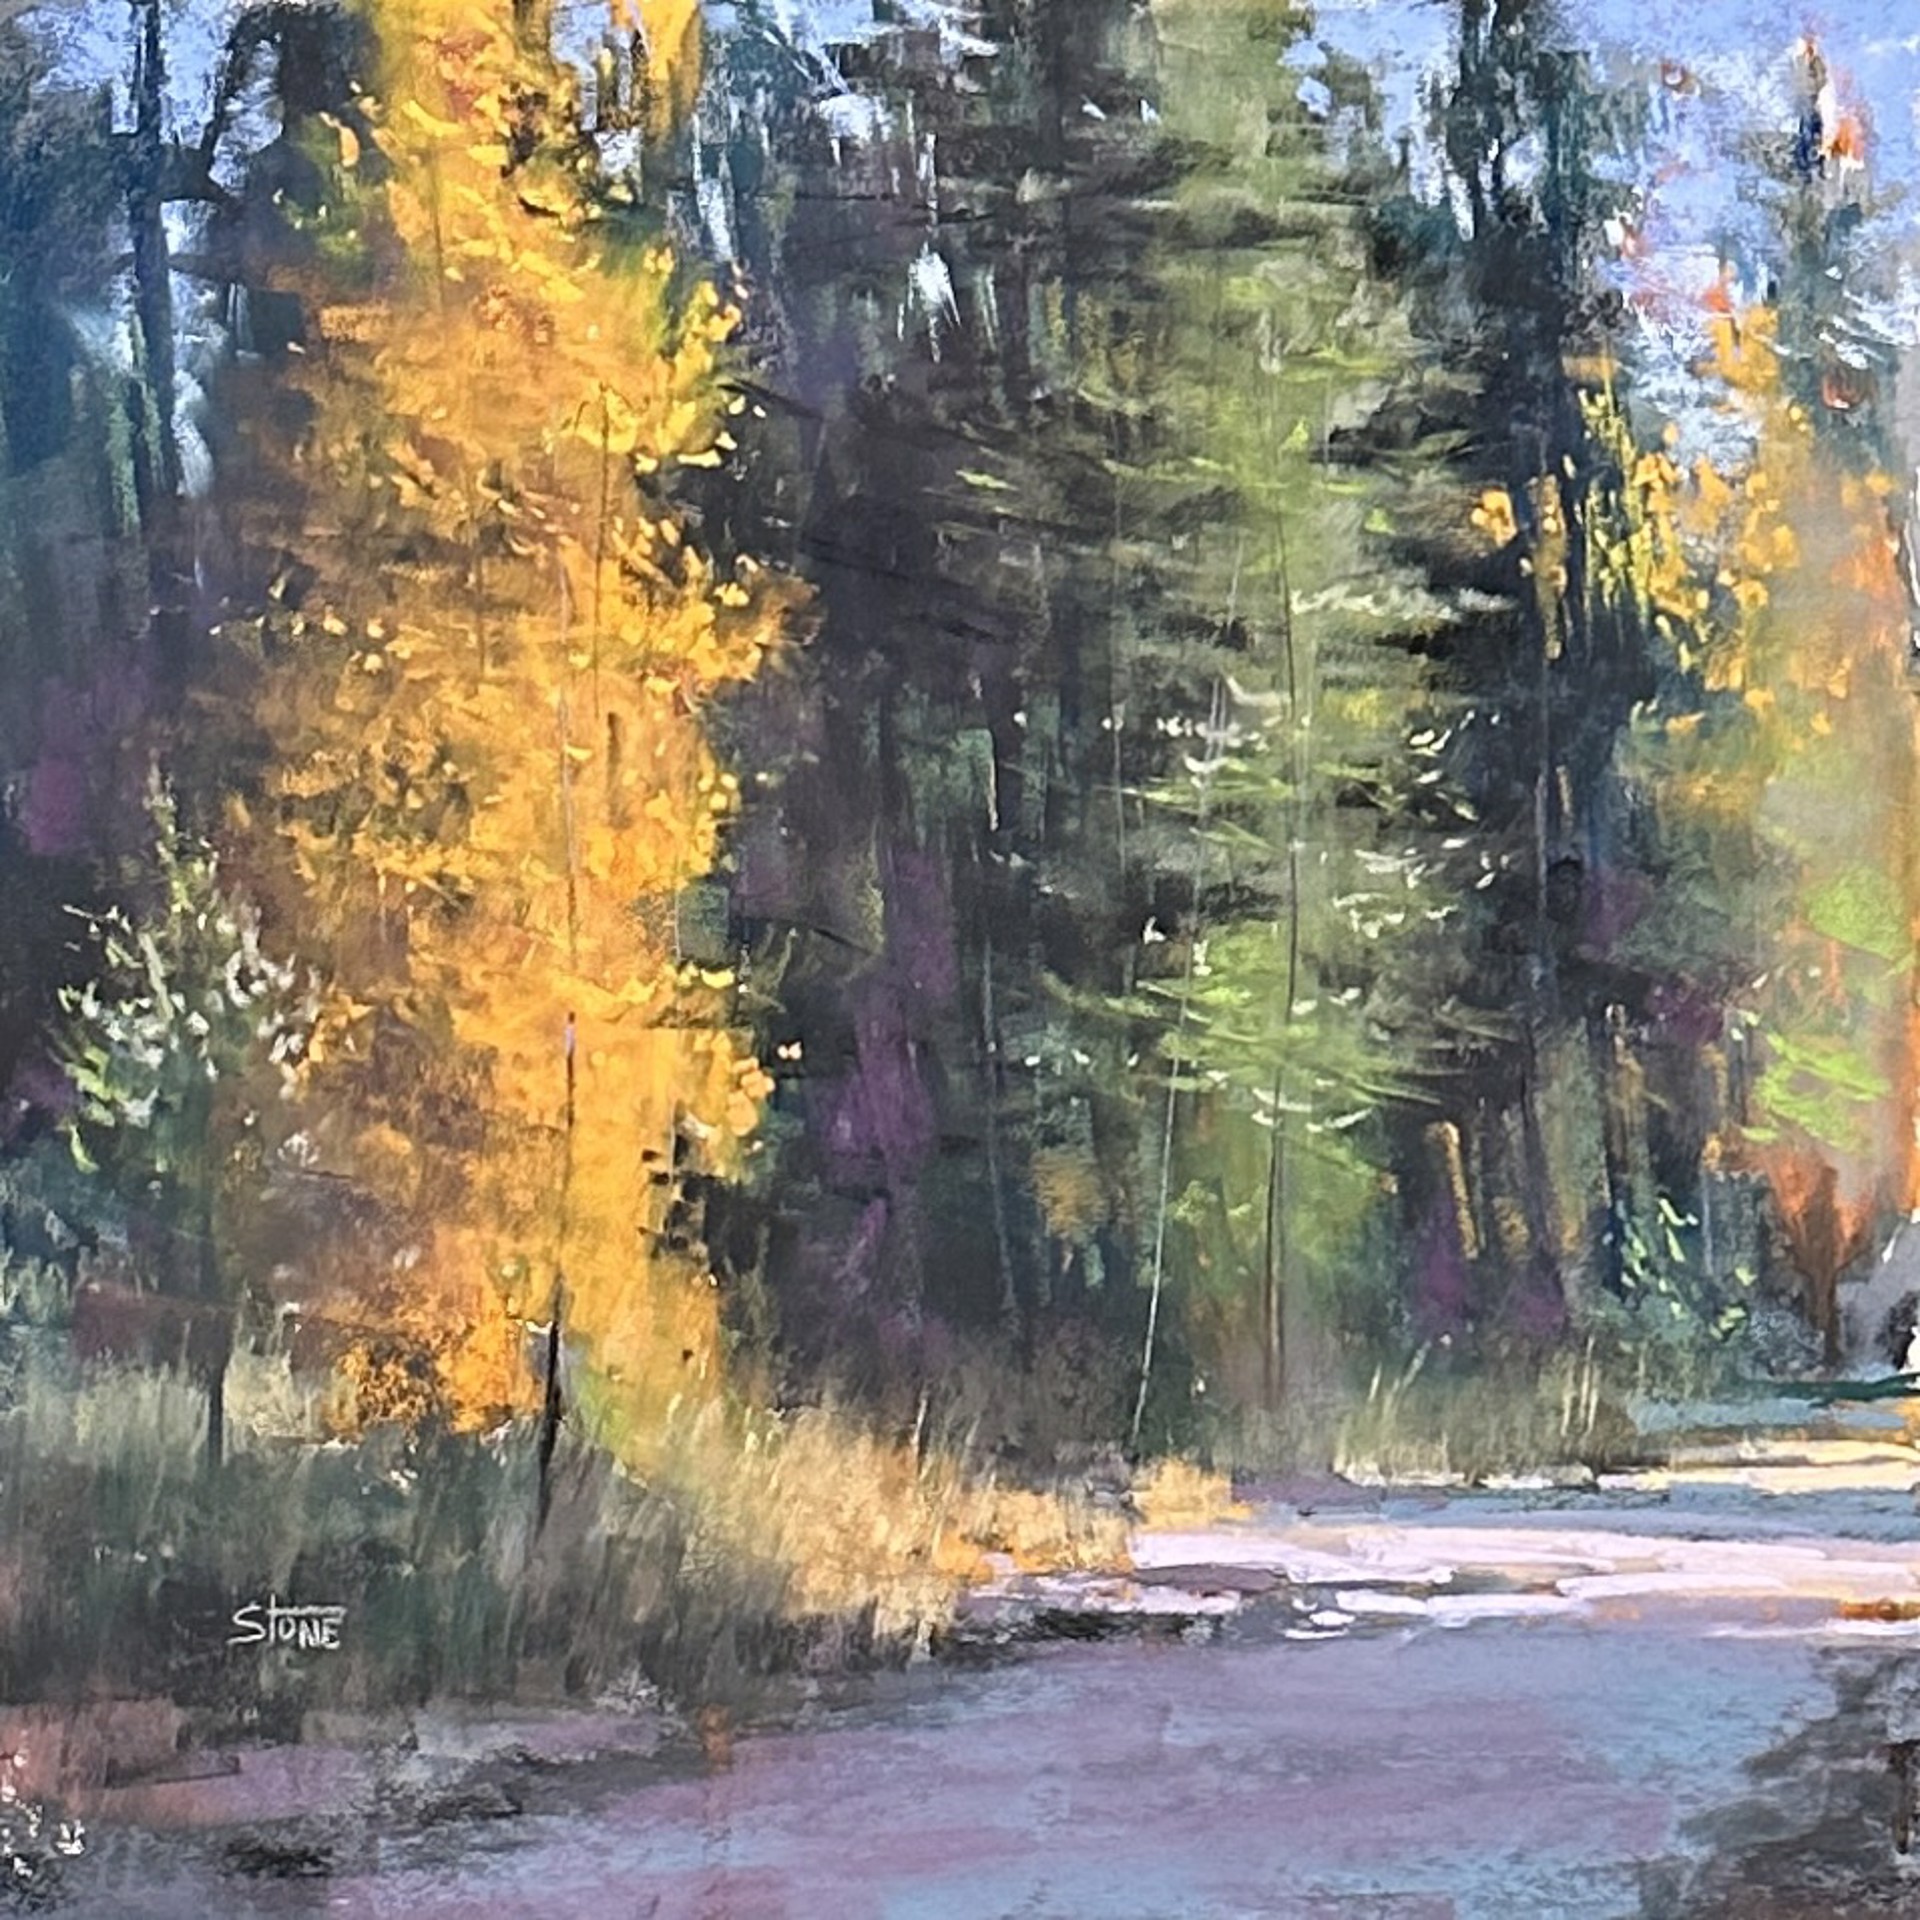 The Road to Autumn by Greg Stone